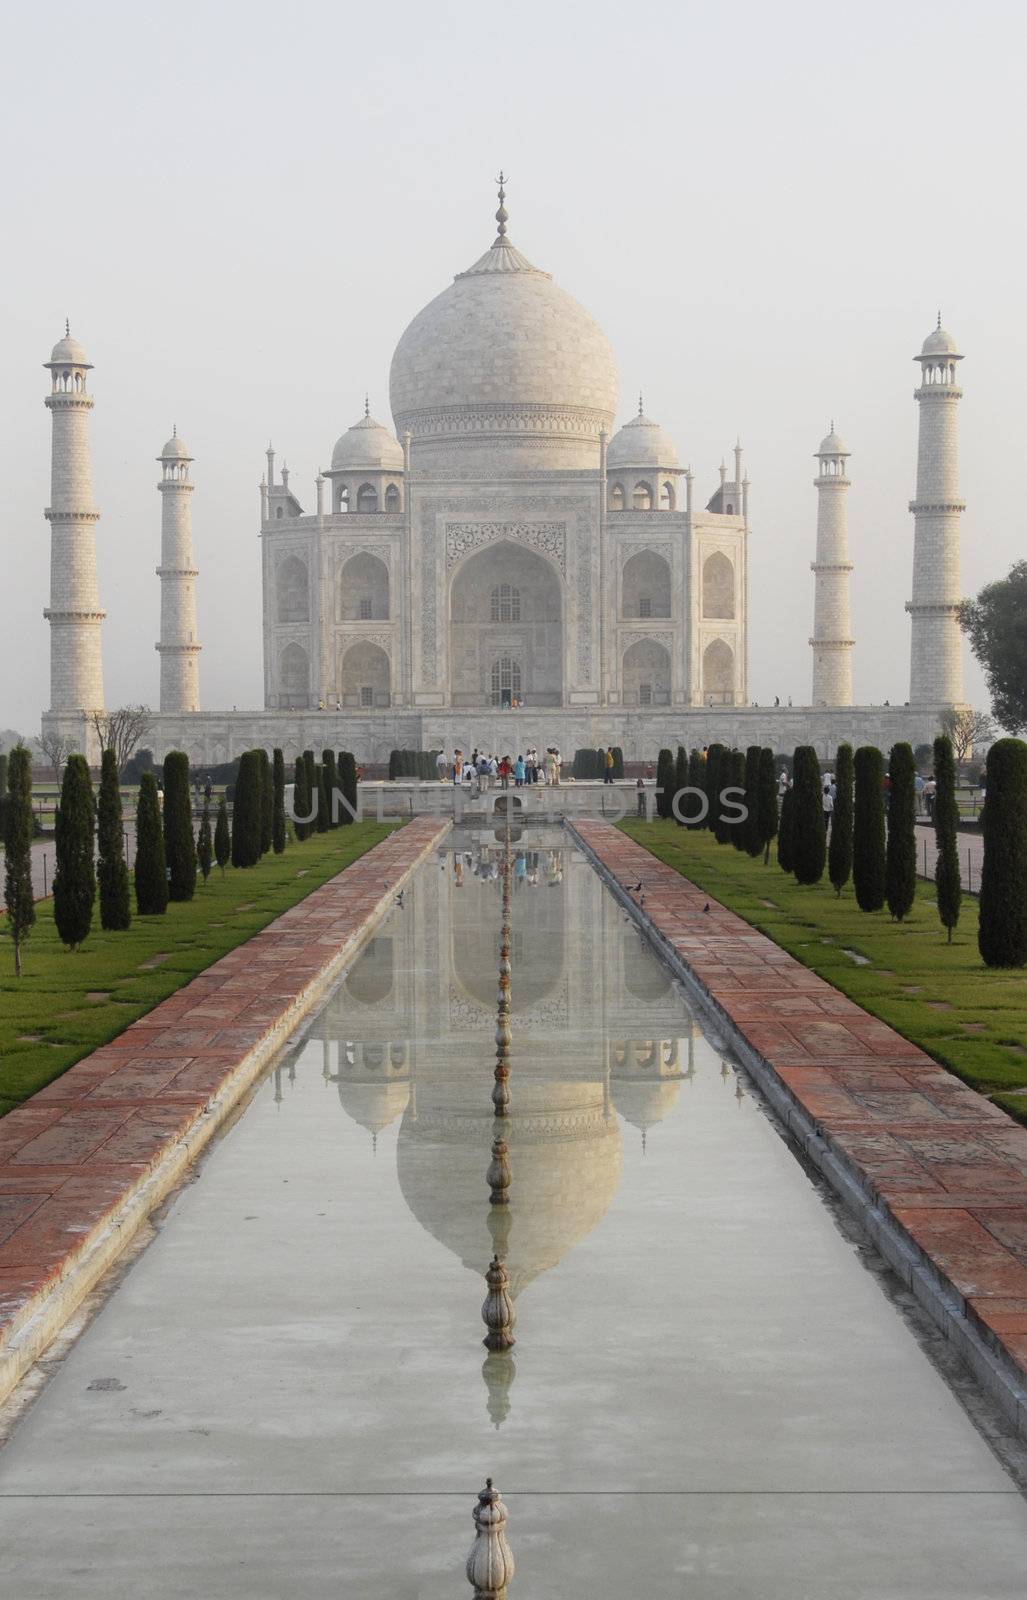 Classic view of the Taj Mahal in Agra, India.  Showing the main mausoleum, the domes and minarets as well as the reflection across the pool and the sculptured garden.